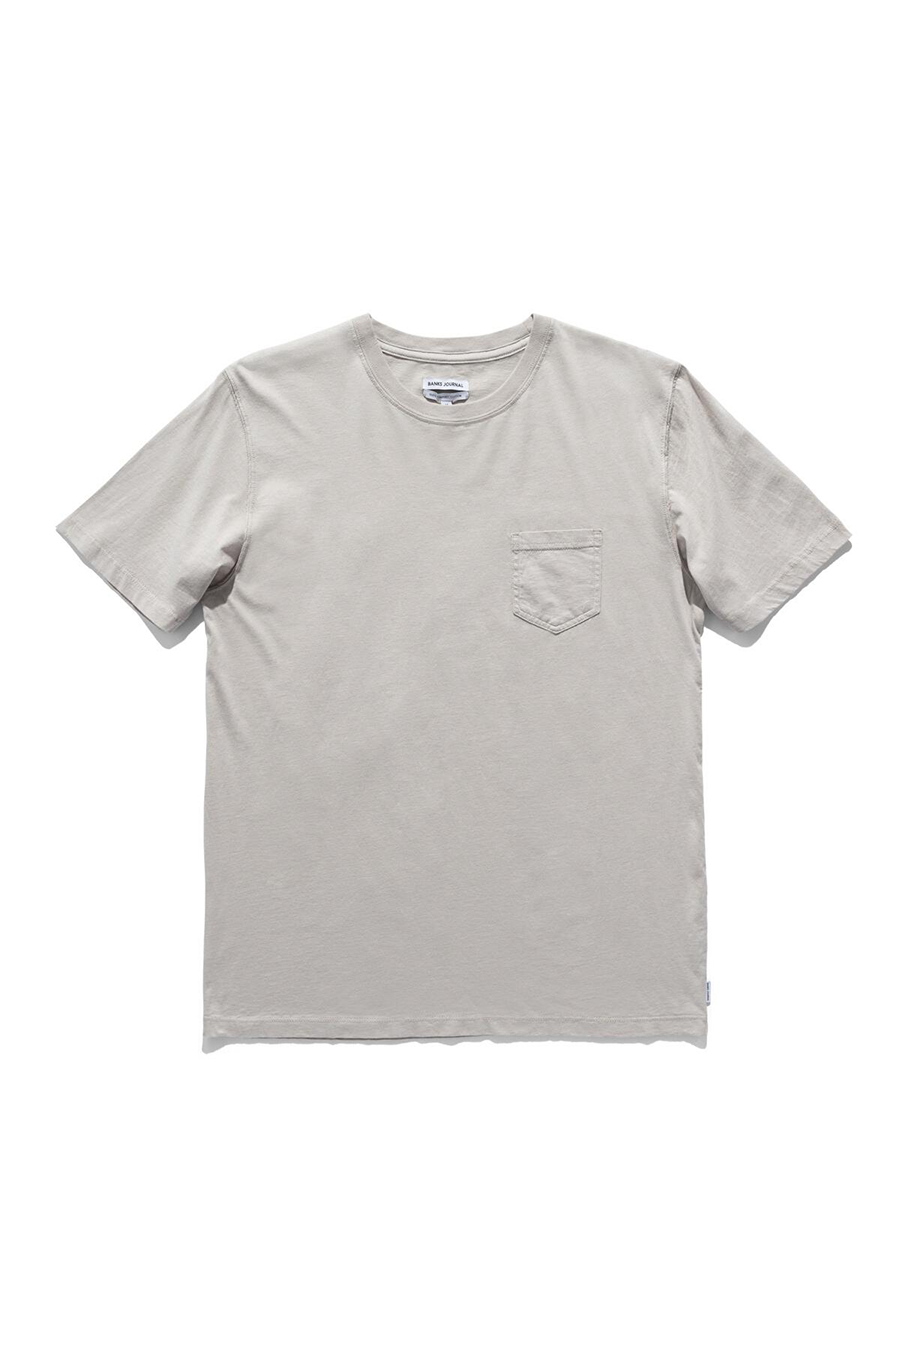 Primary Classic Tee | Washed Grey - Main Image Number 1 of 1